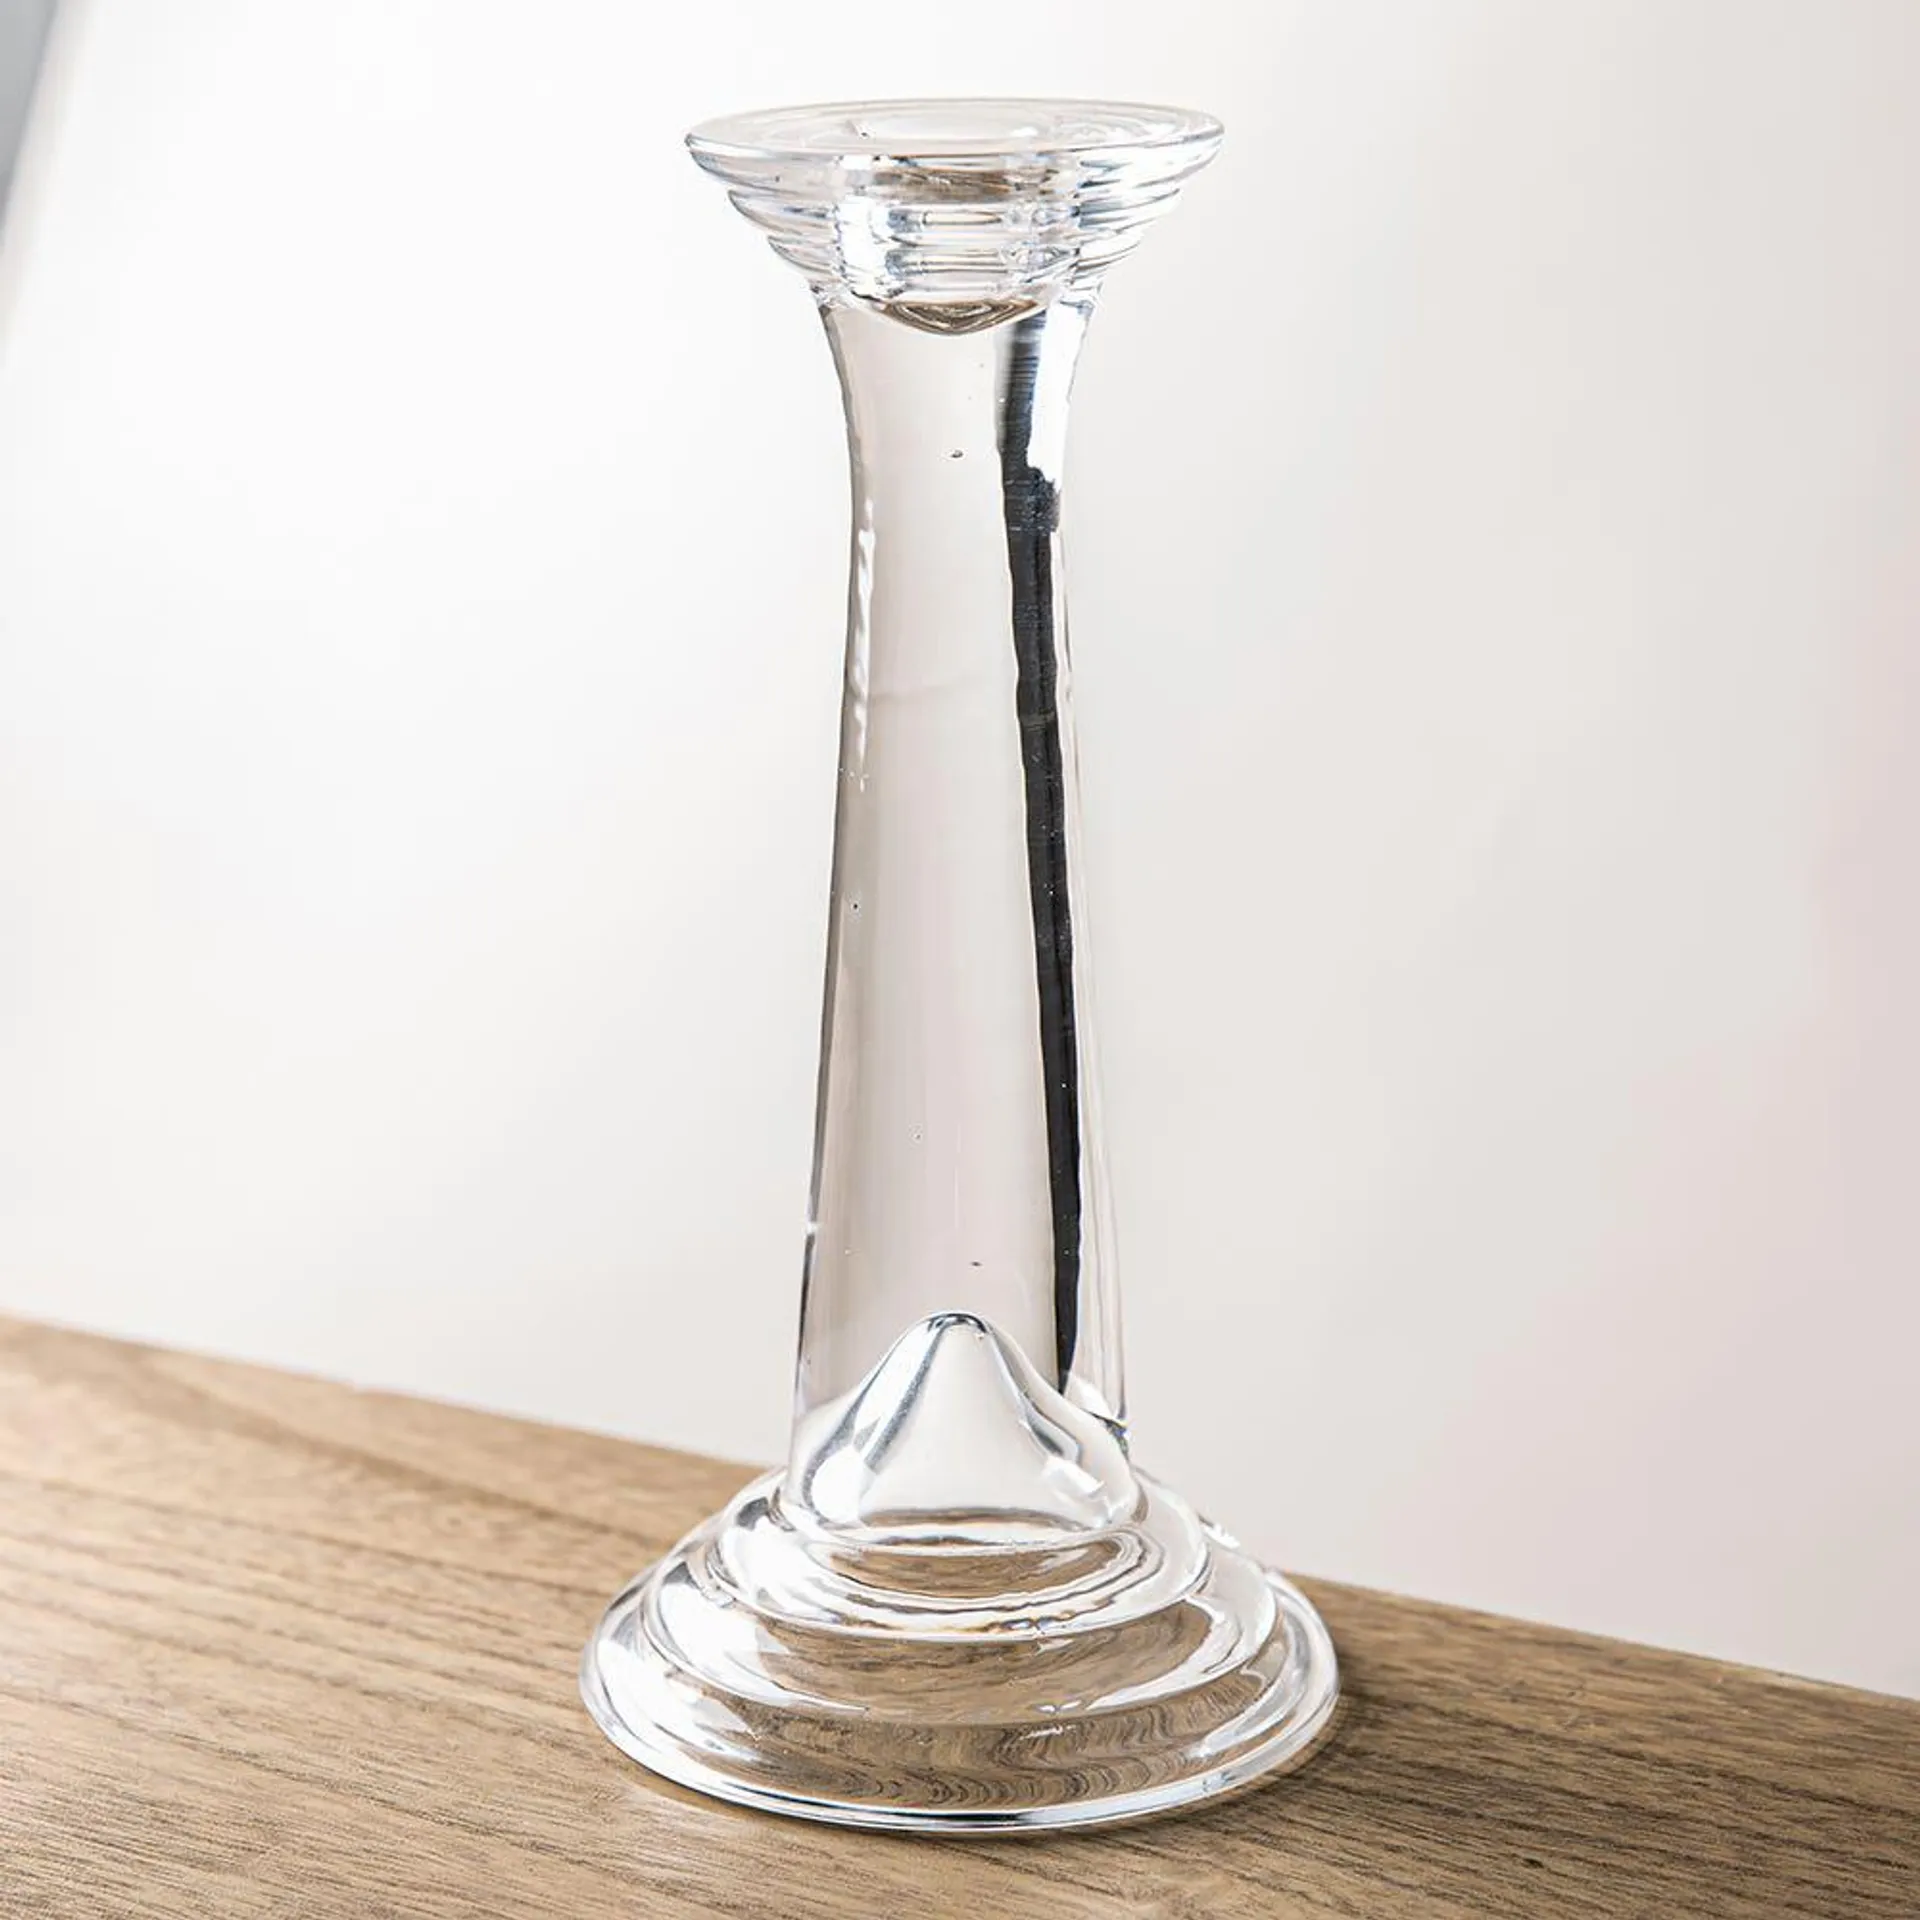 Harman Classic 'Round' Glass Candlestick Holder 4" (Clear)